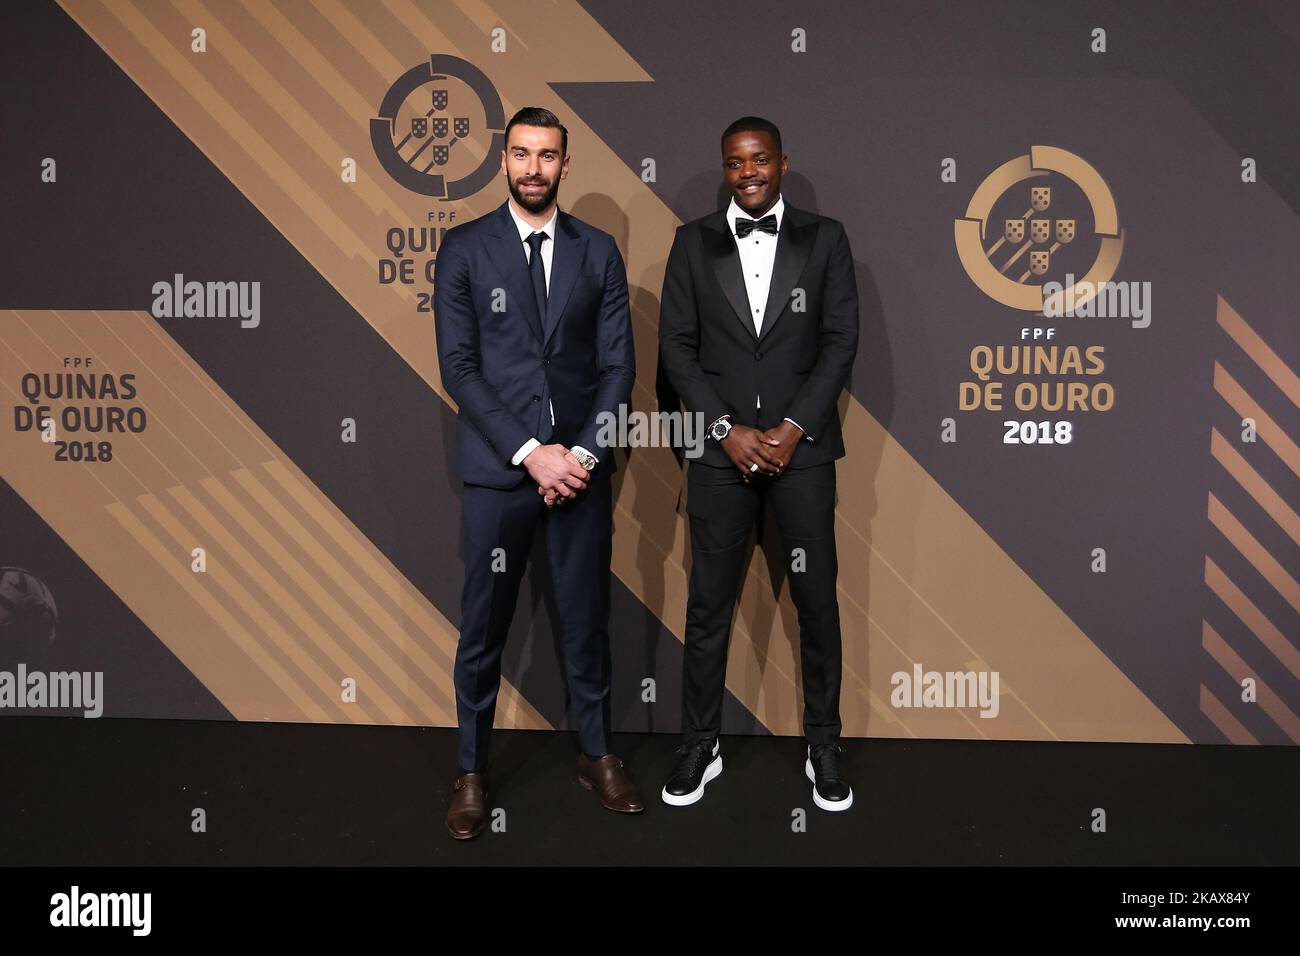 Portugals goalkeeper Rui Patricio (L) and Portugal's midfielder William Carvalho (R) poses on arrival at 'Quinas de Ouro' 2018 ceremony held and the Pavilhao Carlos Lopes in Lisbon, Portugal on March 19, 2018. (Photo by Bruno Barros / DPI / NurPhoto) Stock Photo